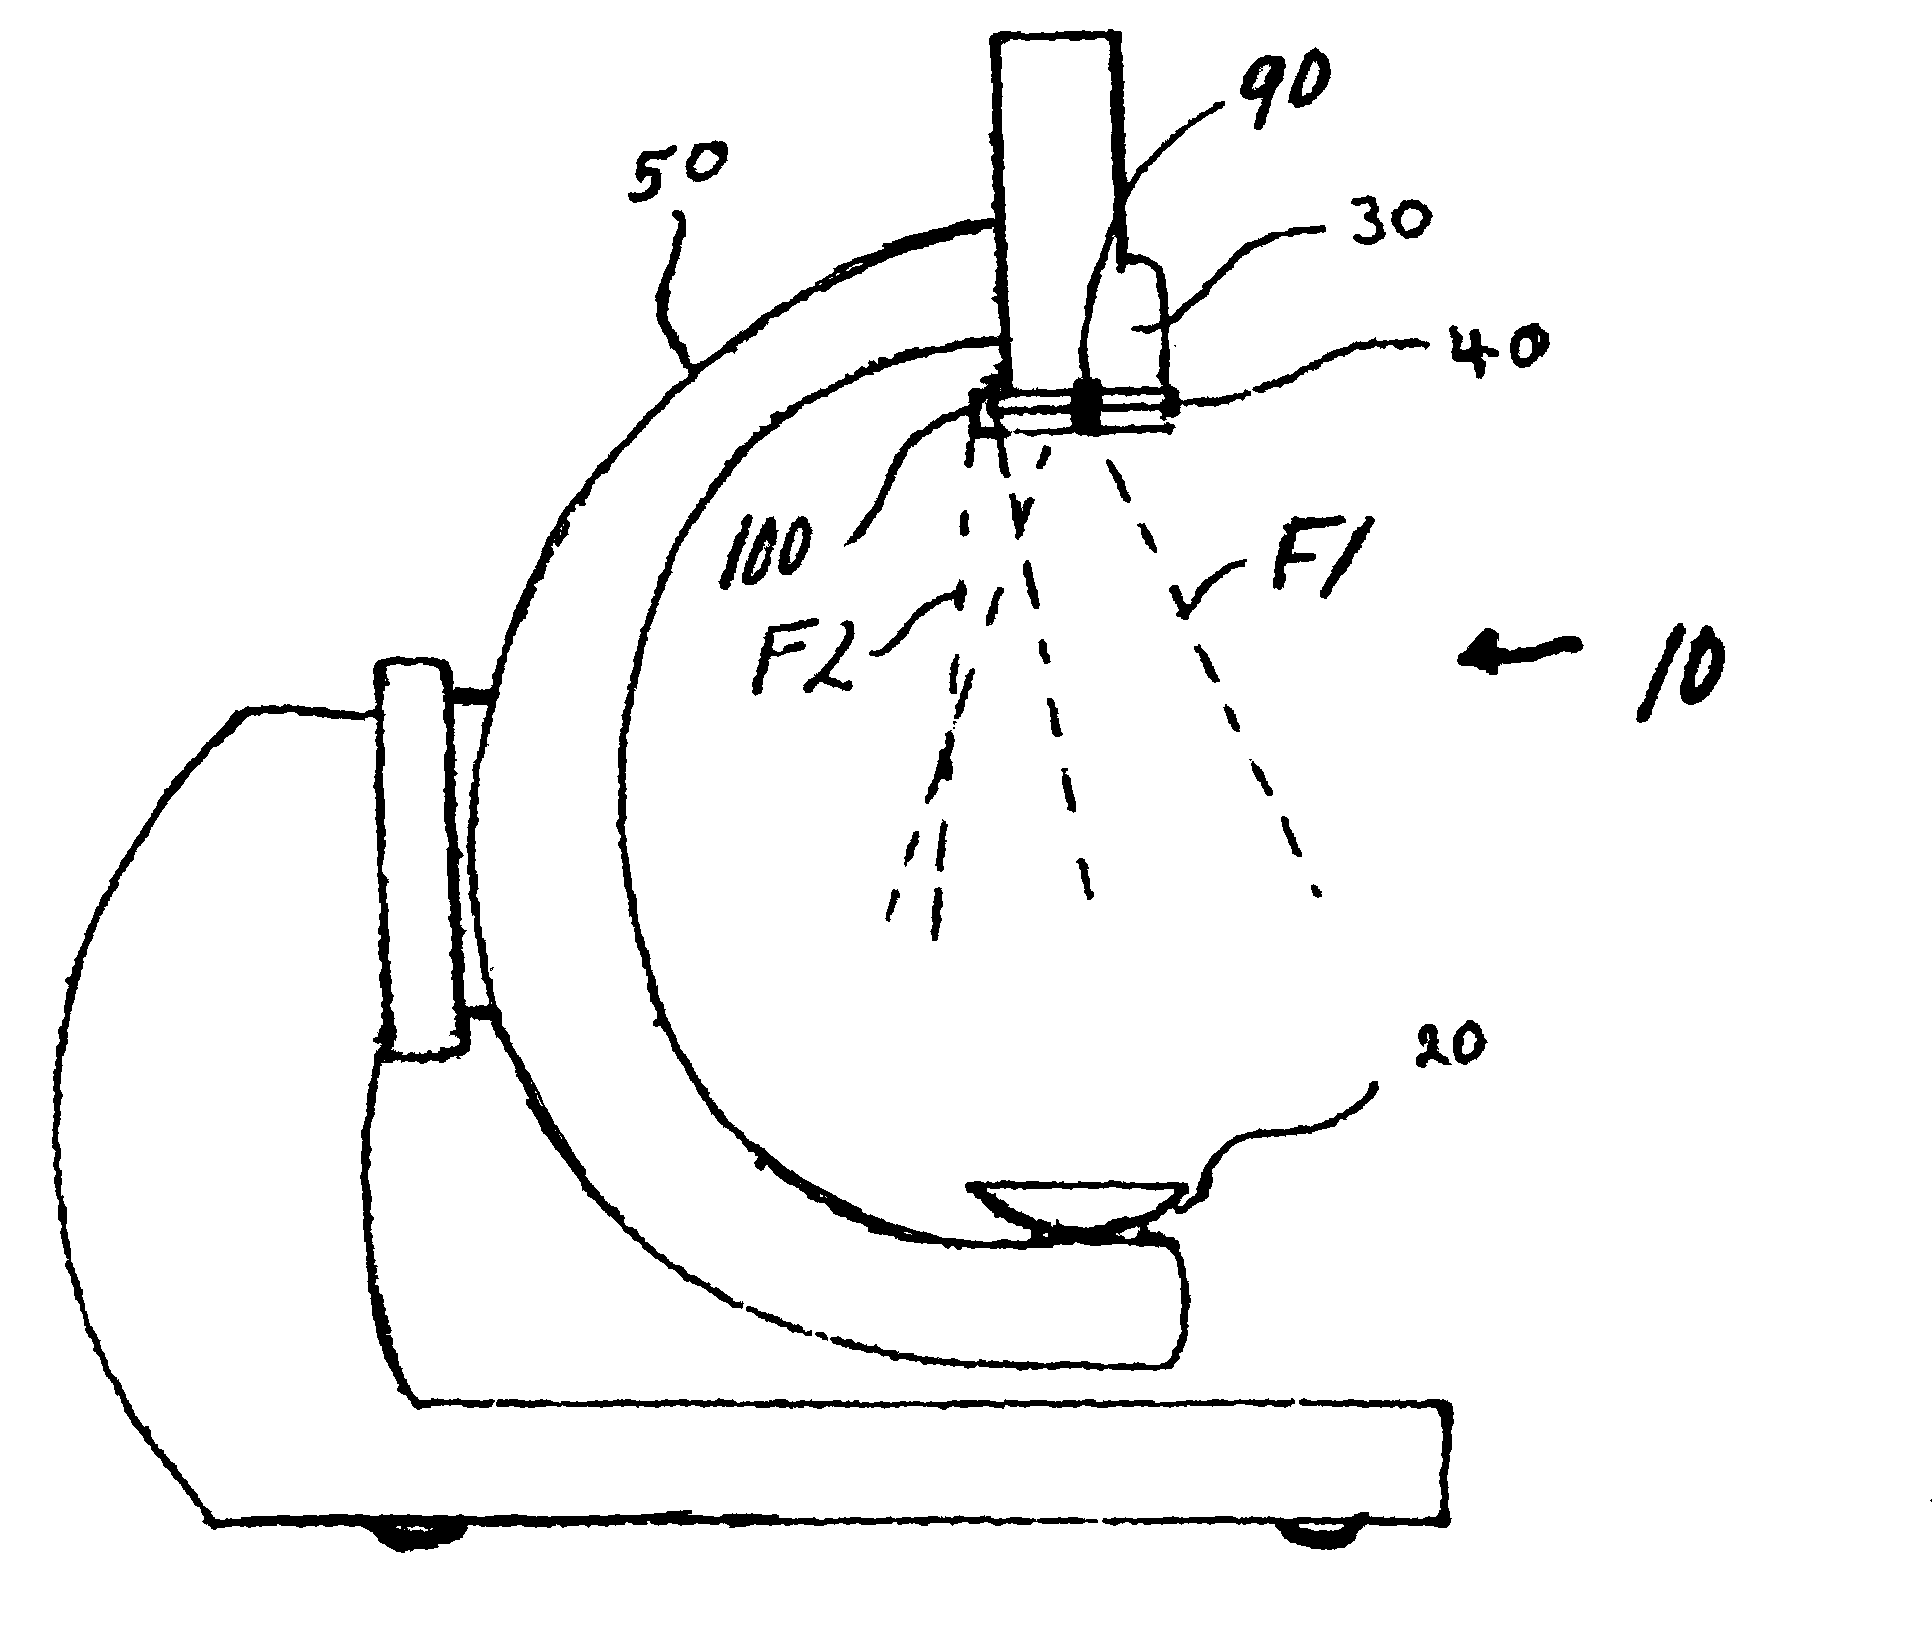 Targeting system for use with x-ray machines